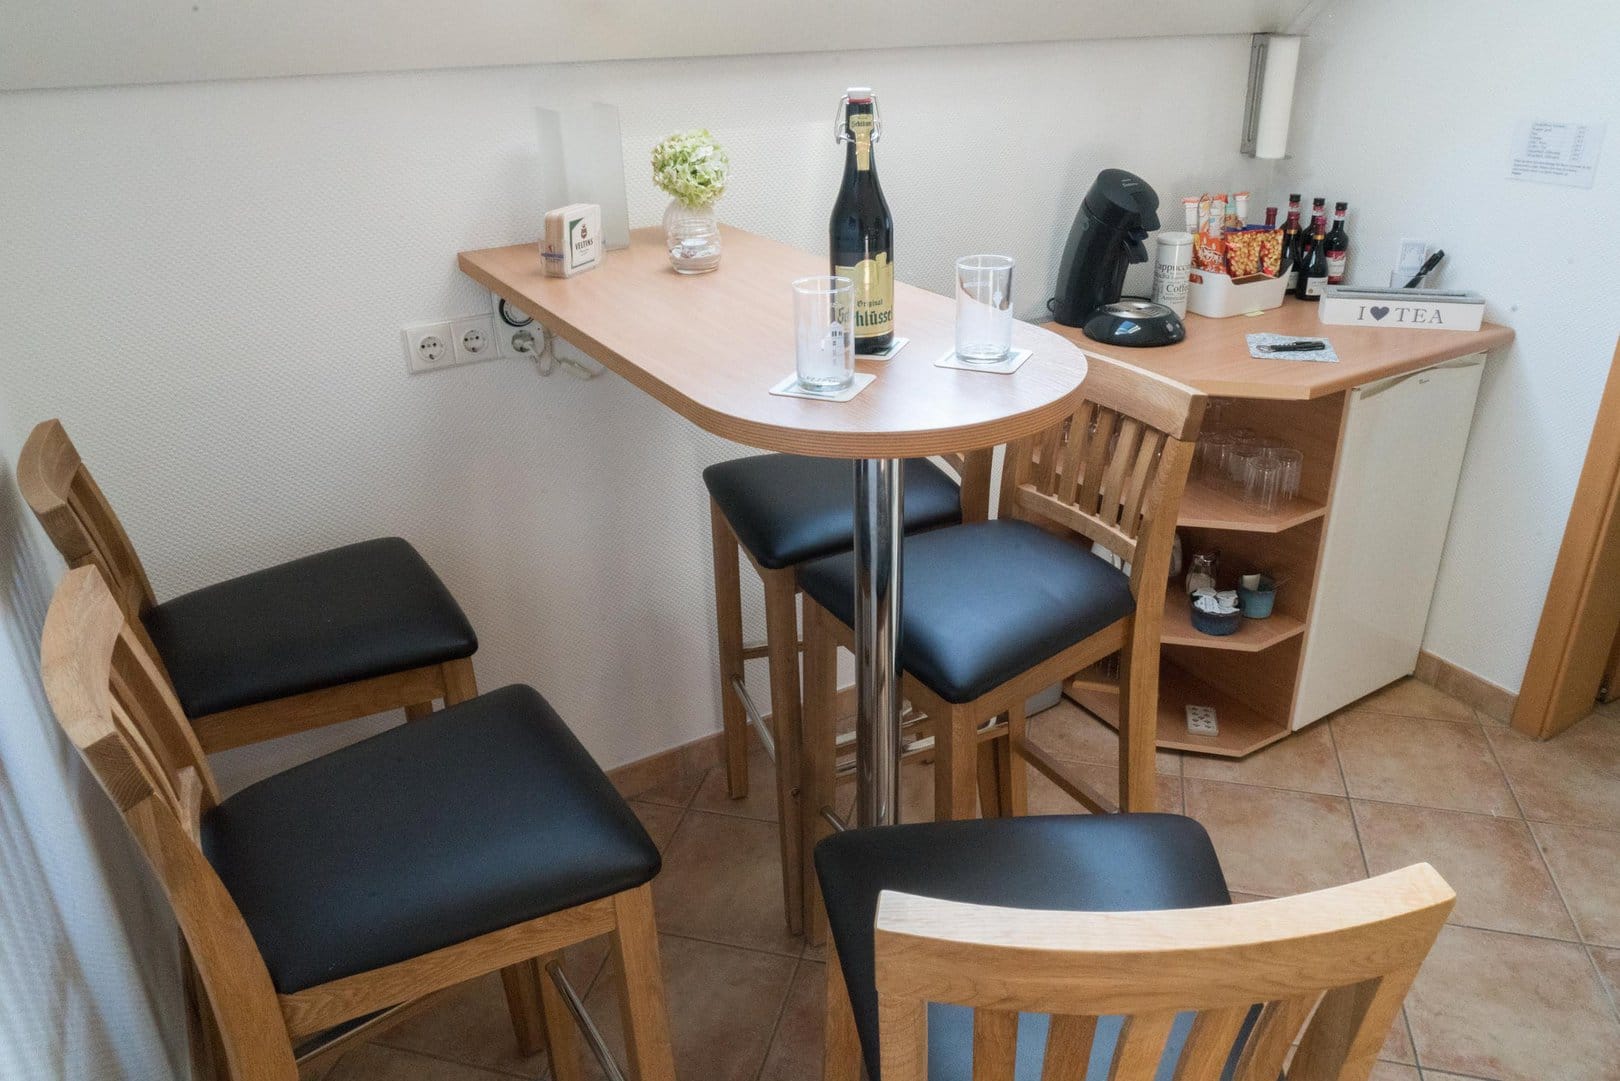 Common room with a standing table and chairs. On it, a bottle of “Altbier”. In the background you can see the minibar with a coffee machine, snacks, bottles of wine, as well as glasses and cups.